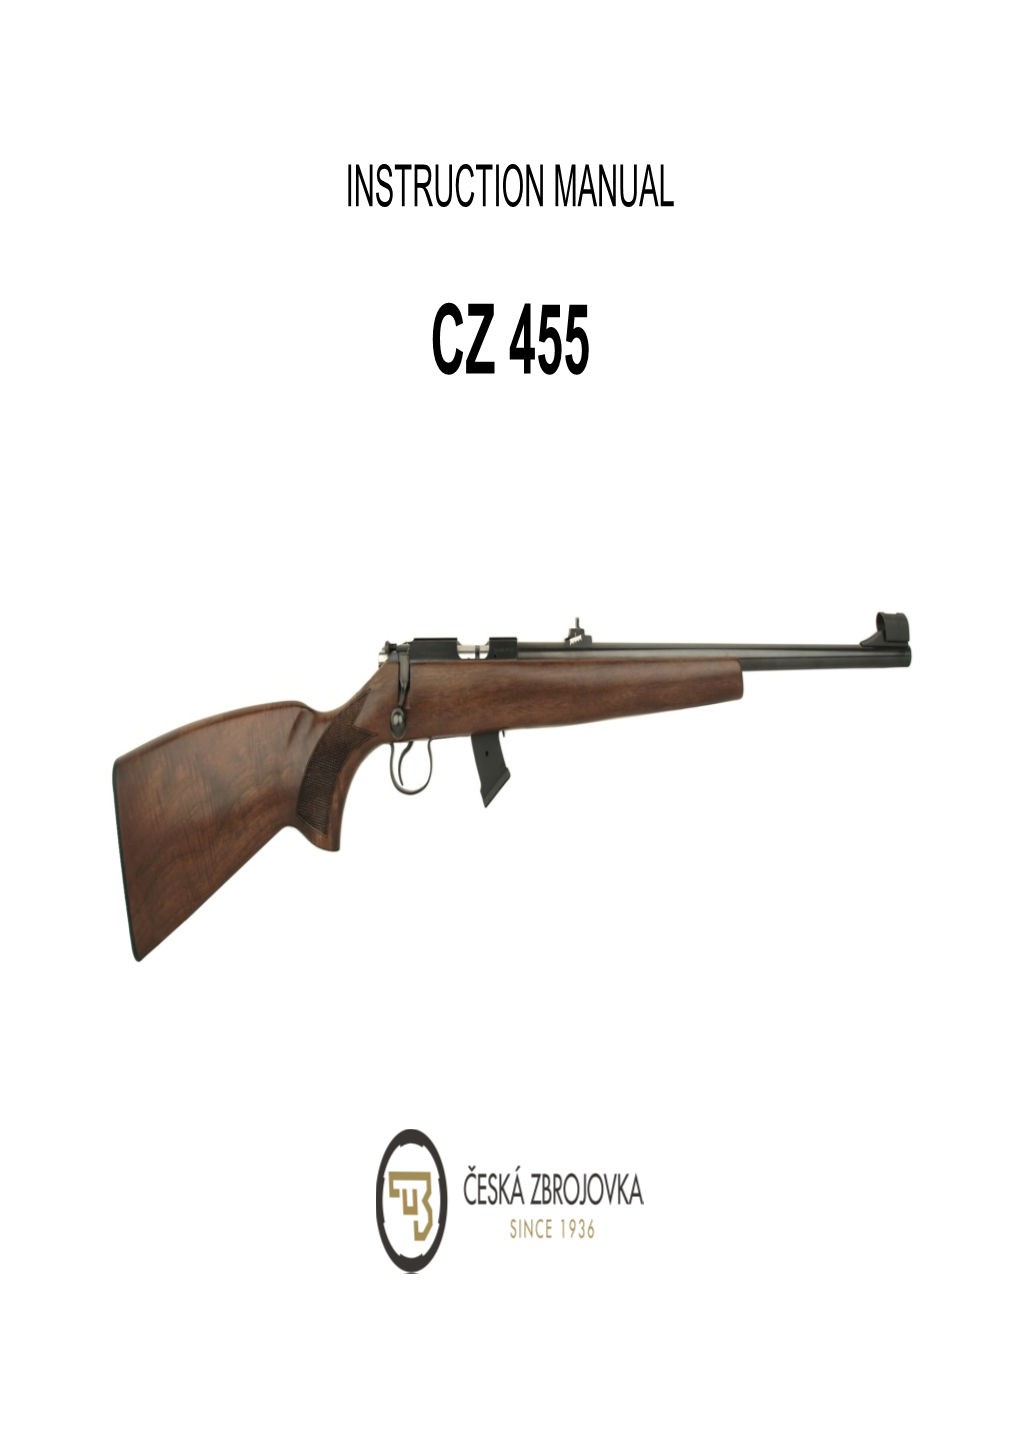 CZ 455 Owners Manual